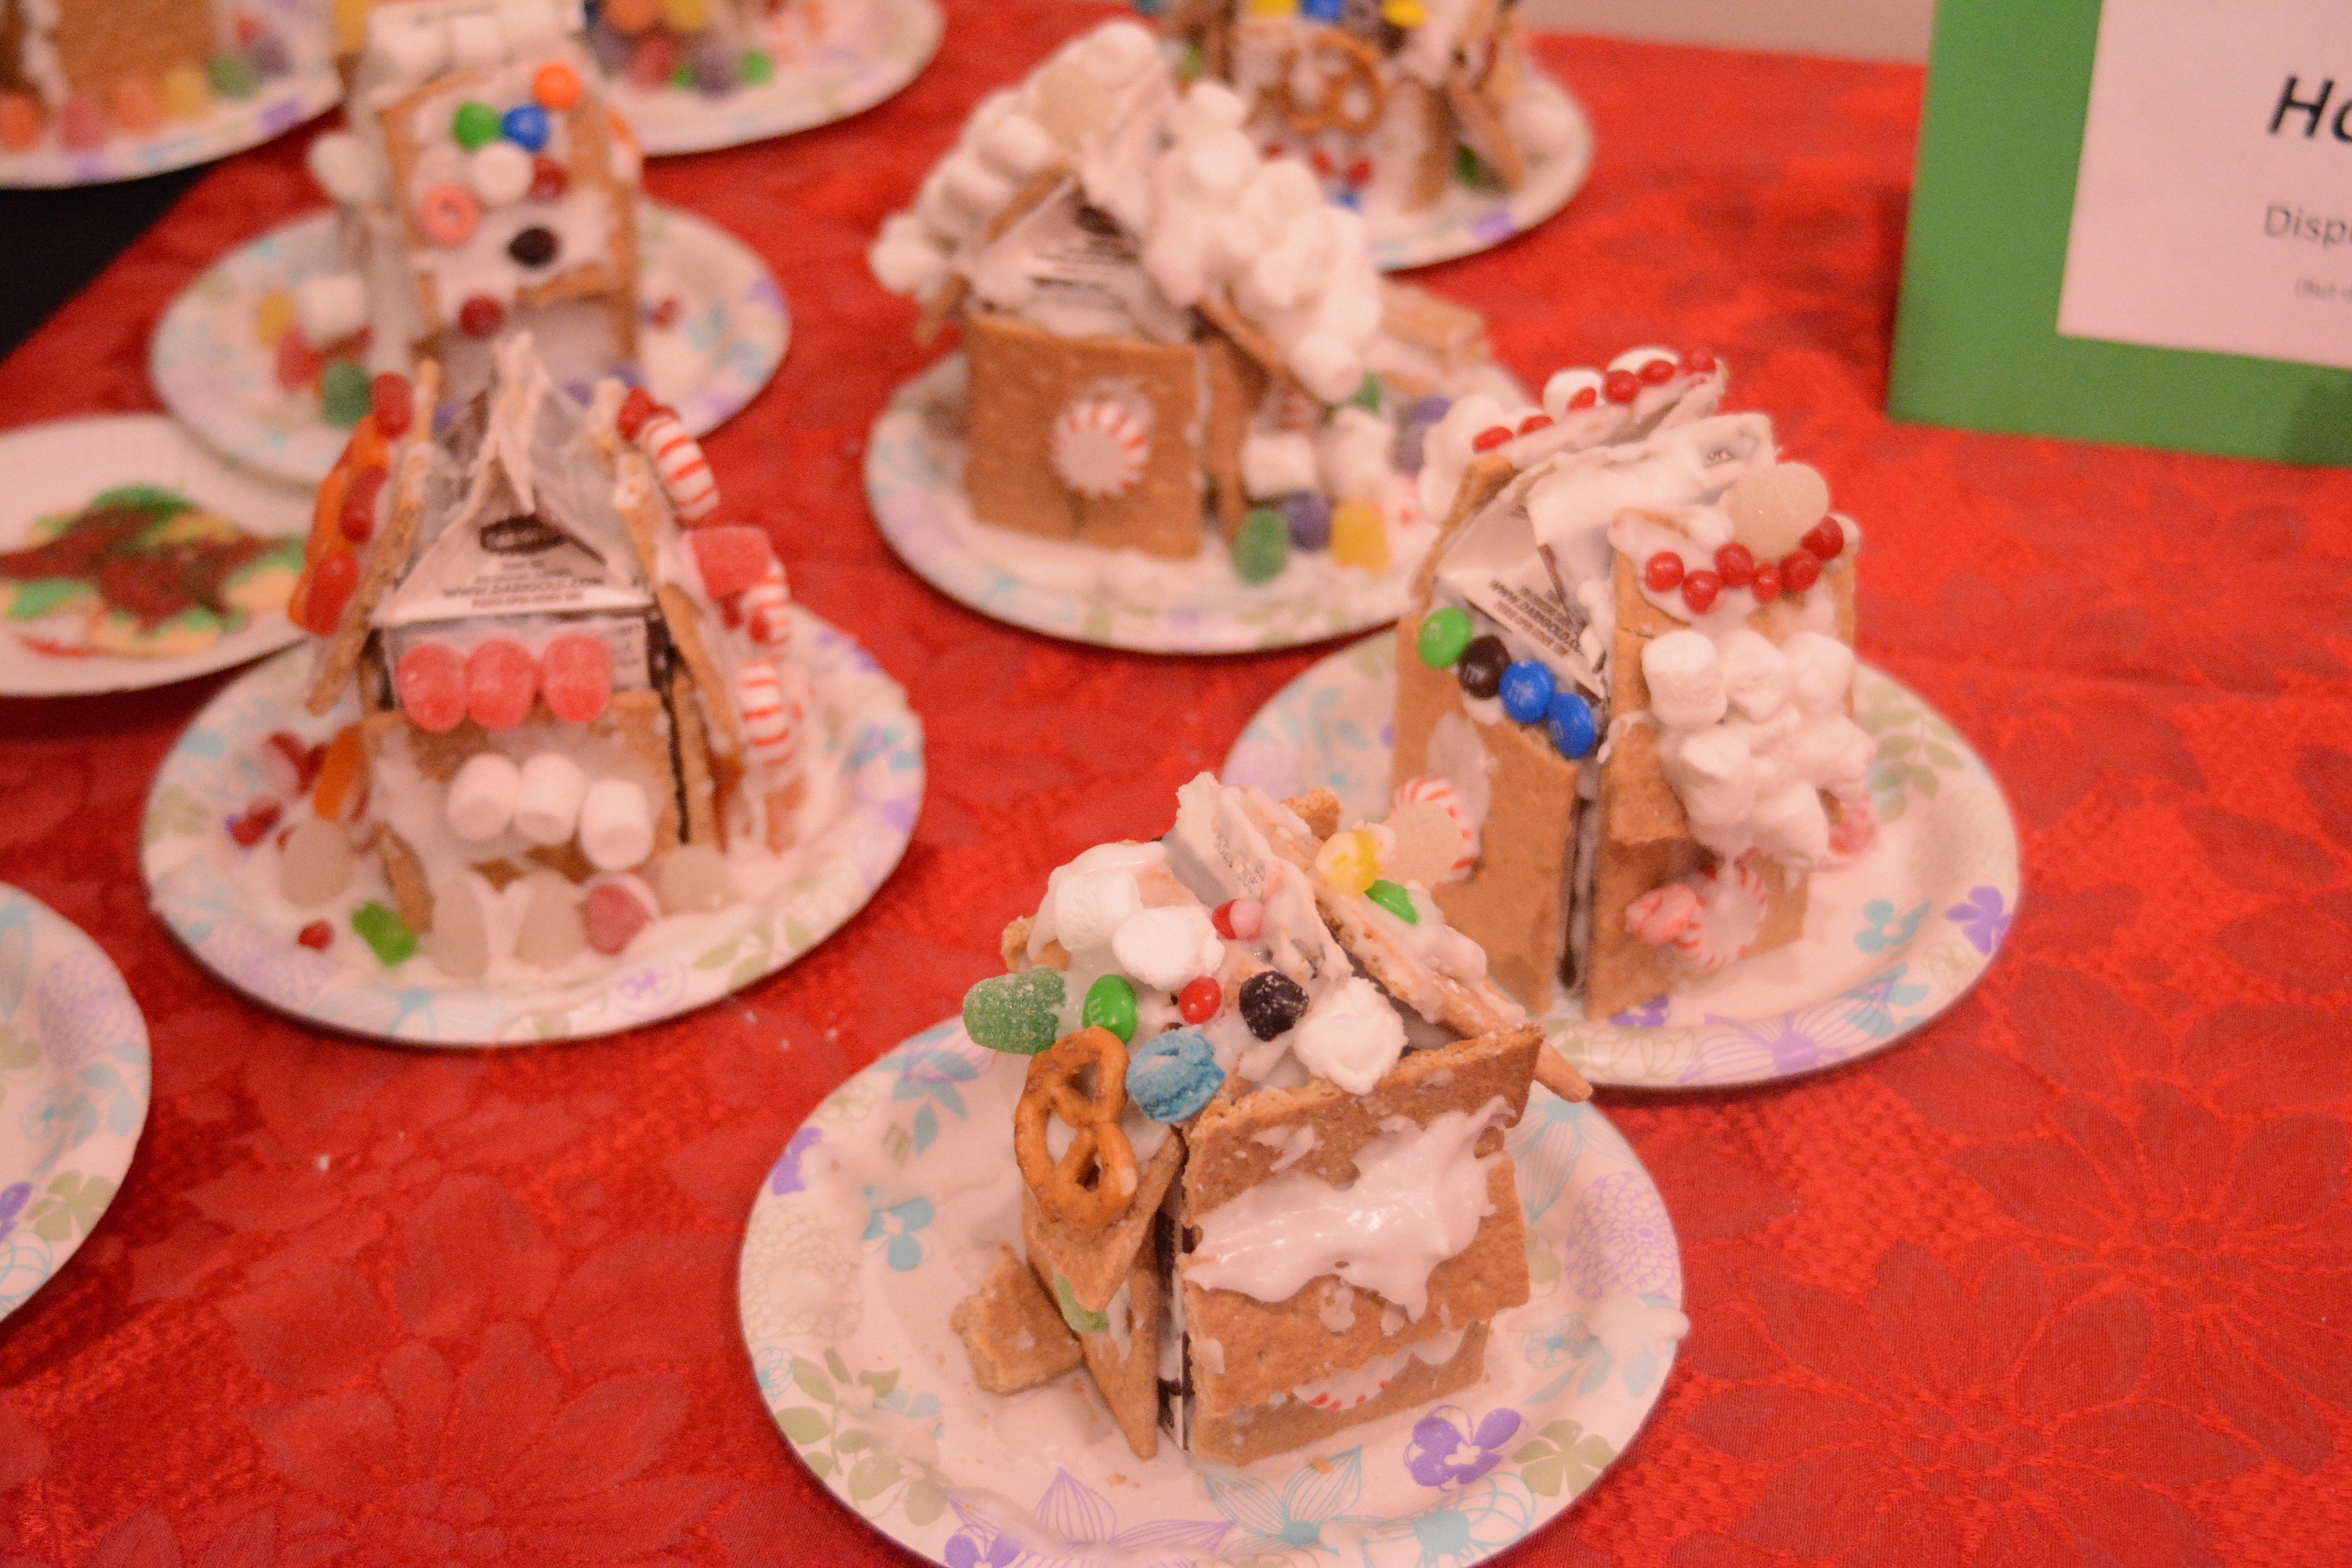 Completed graham-cracker houses are on display. The  Pratt Museum's annual event also included a visit from Santa Claus in the museum's historic Harrington Cabin.-Photo by Michael Armstrong, Homer News